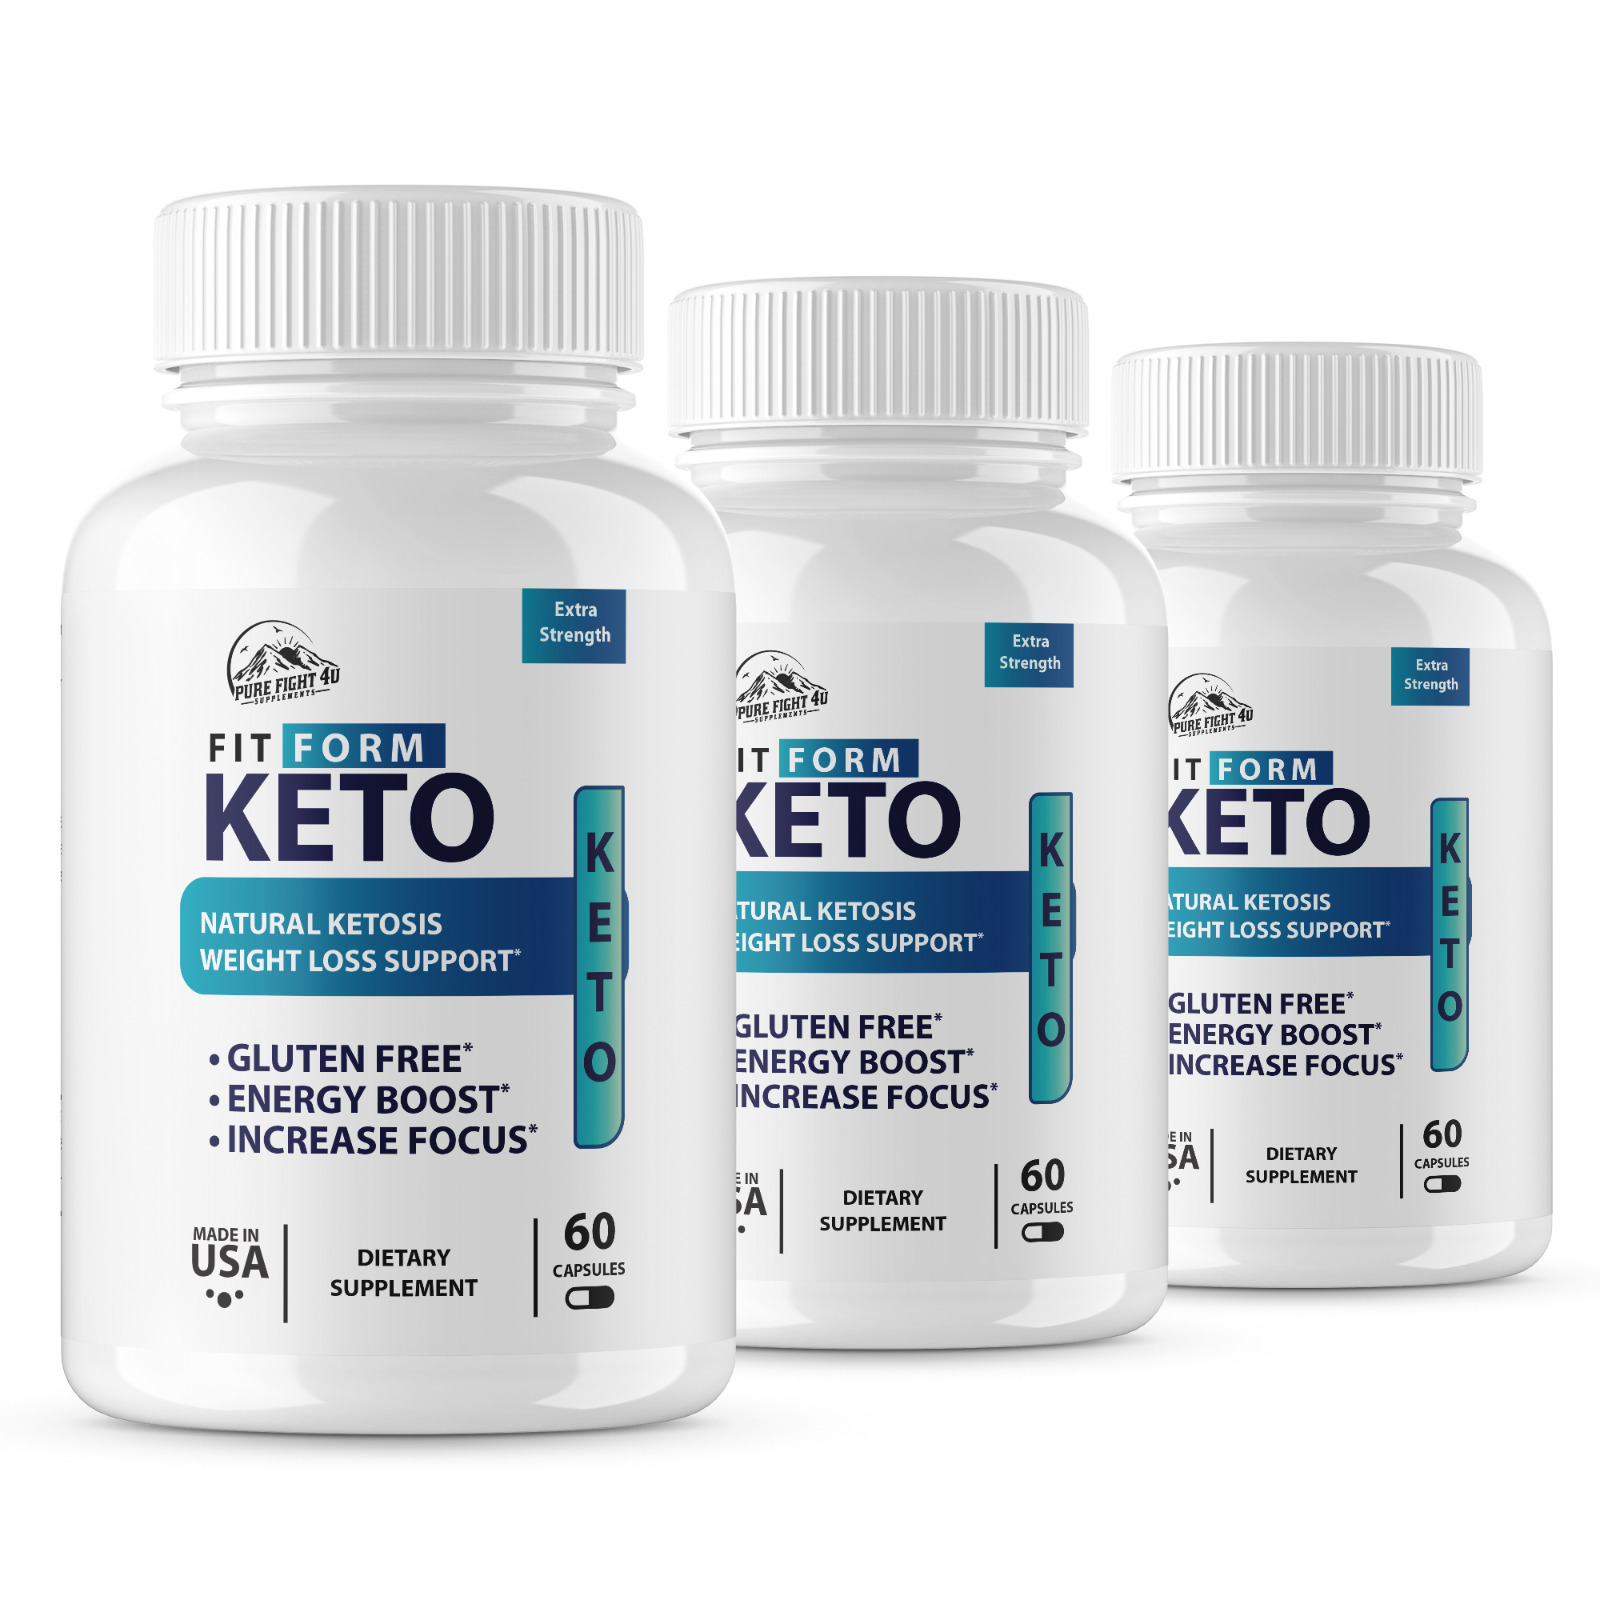 Fit Form Keto Weight Loss Support 3 Bottles 180 Capsules